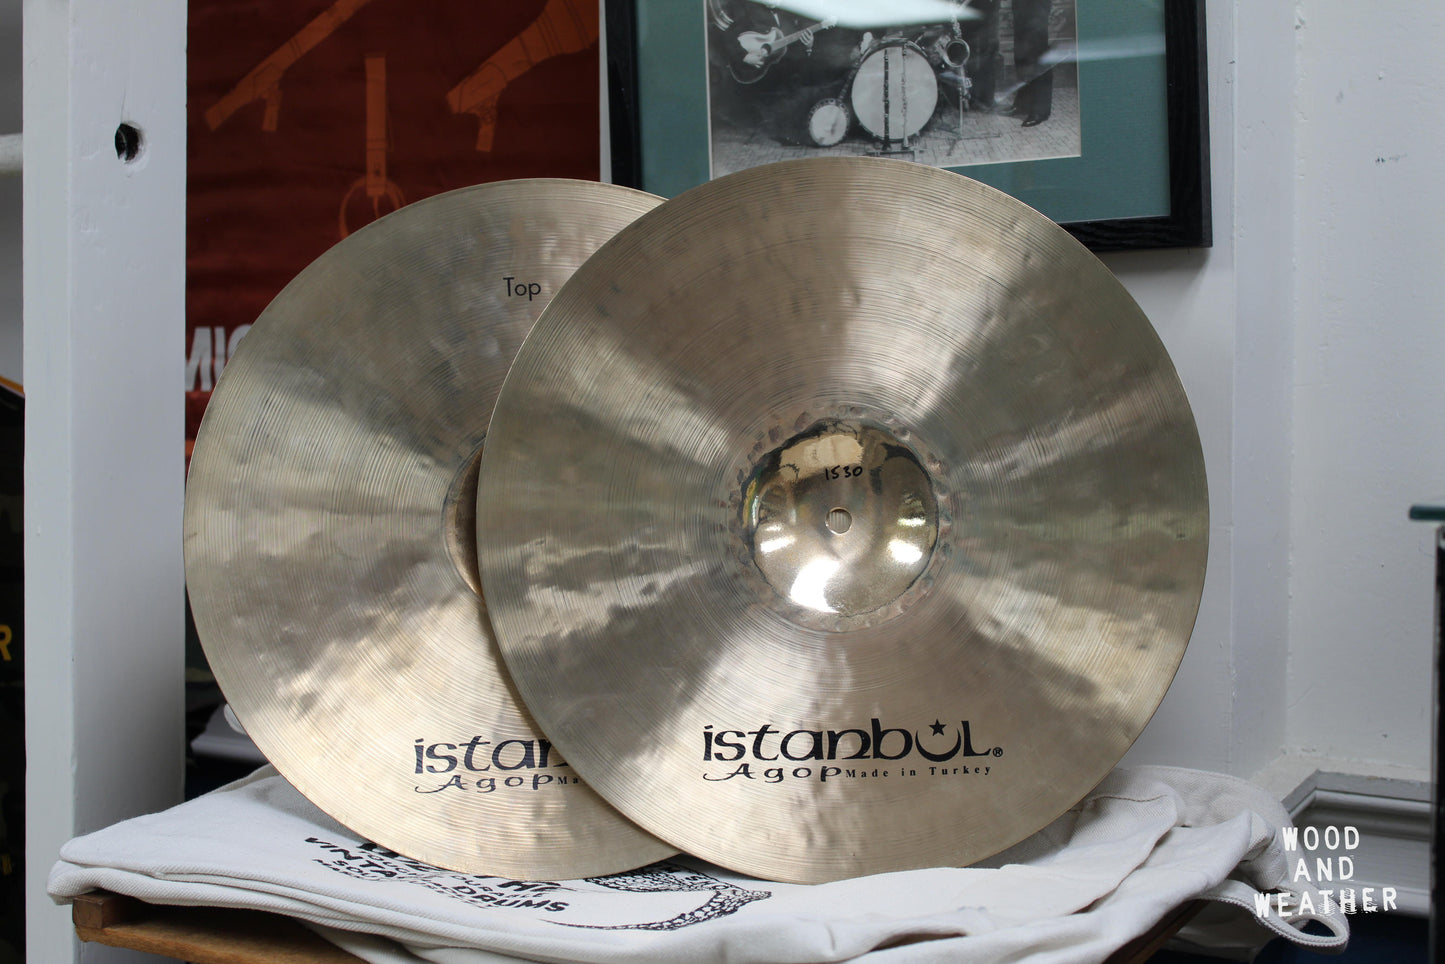 Used Istanbul Agop 15" Xist Power Hi-Hat Cymbals 1220/1530g